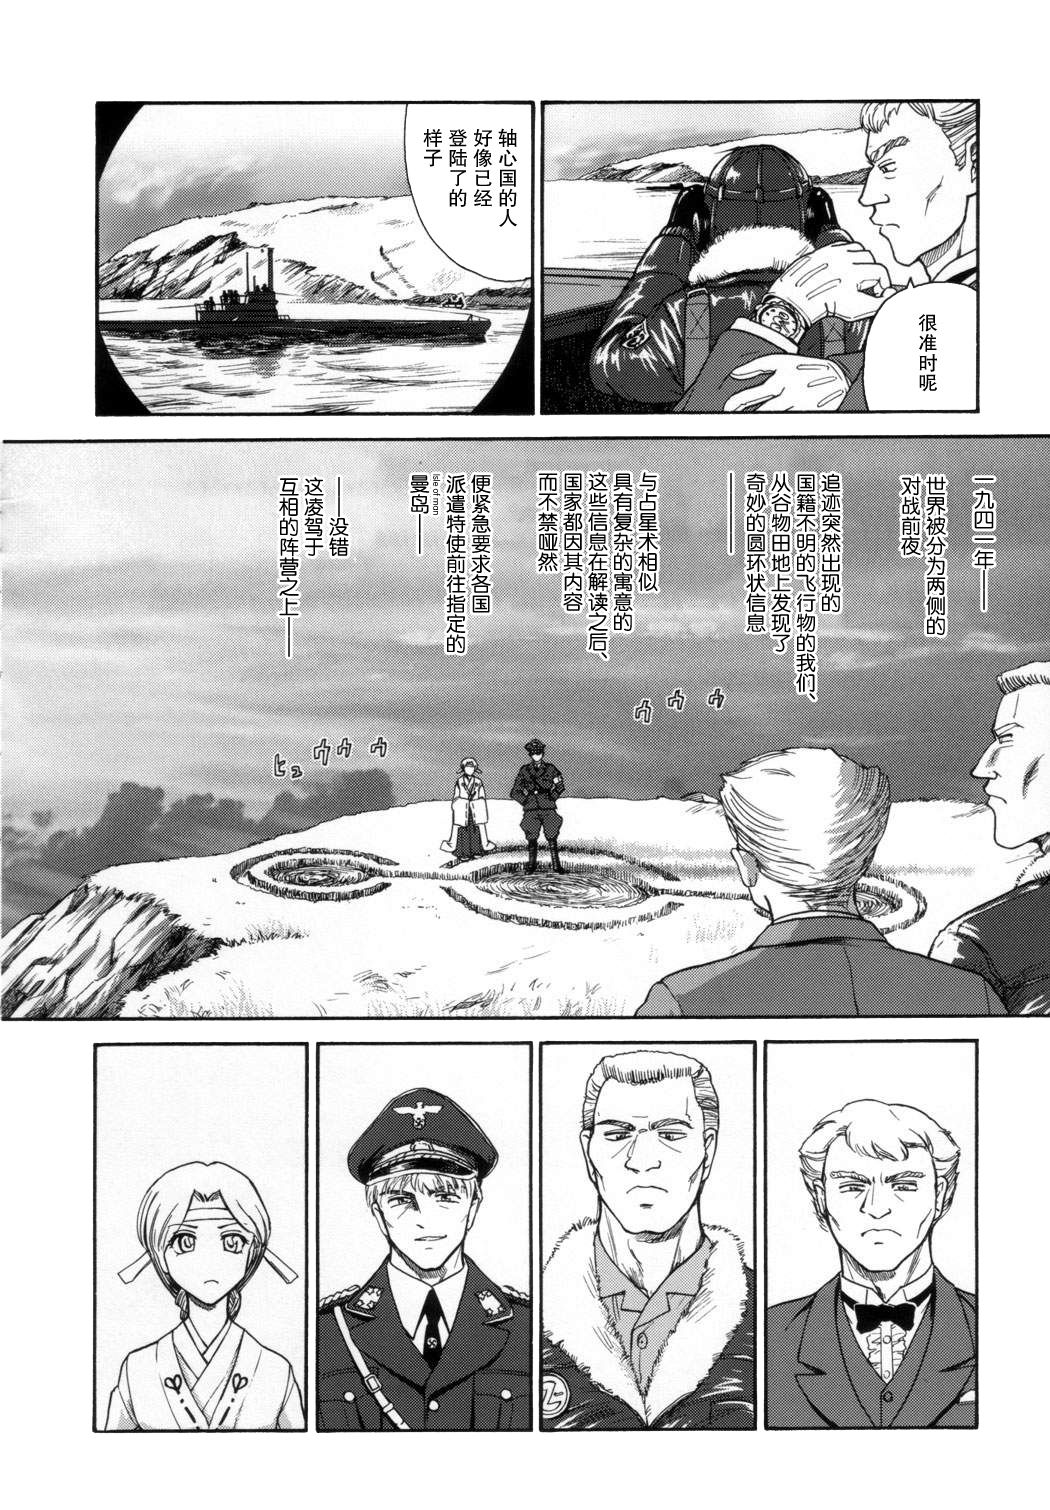 (C72) [Behind Moon (Q)] Dulce Report 9 | 达西报告 9 [Chinese] [哈尼喵汉化组] [Decensored] page 28 full